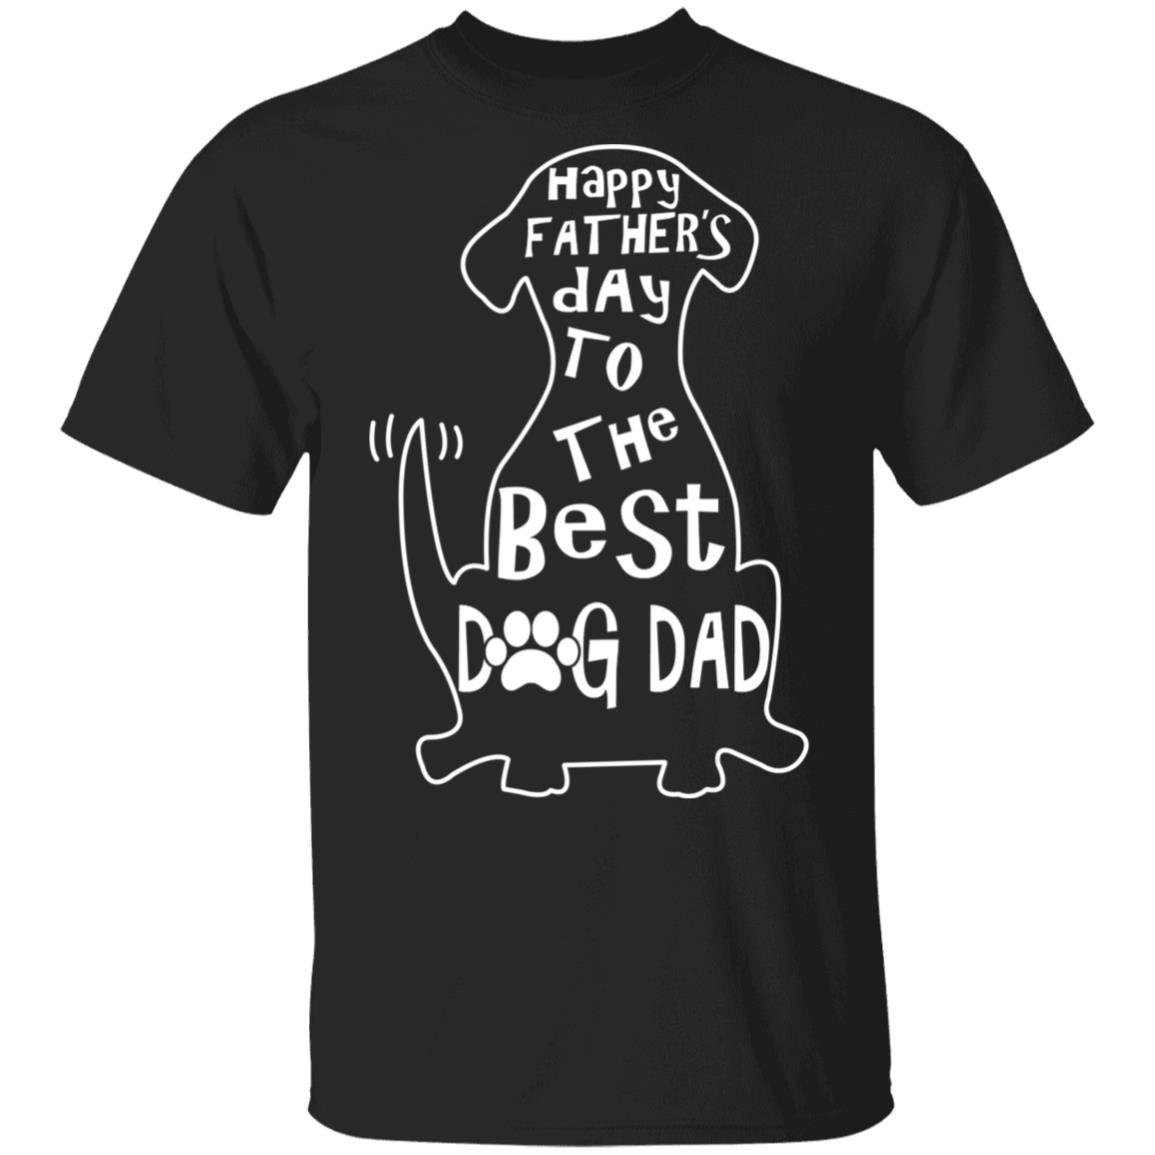 happy-father-s-day-to-the-best-dog-dad-shirt-allbluetees